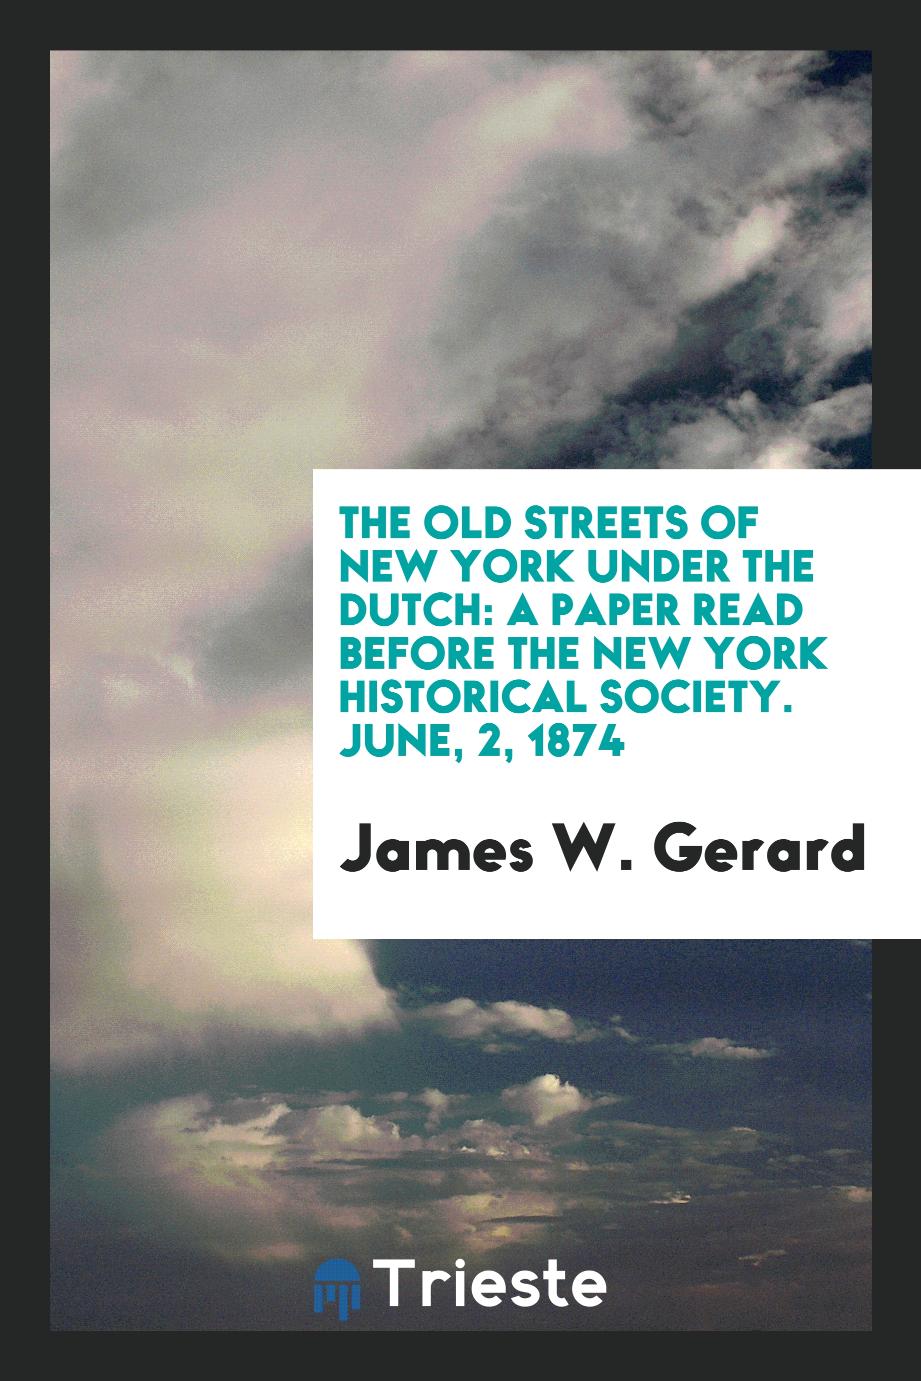 The Old Streets of New York Under the Dutch: A Paper Read Before the New York Historical Society. June, 2, 1874